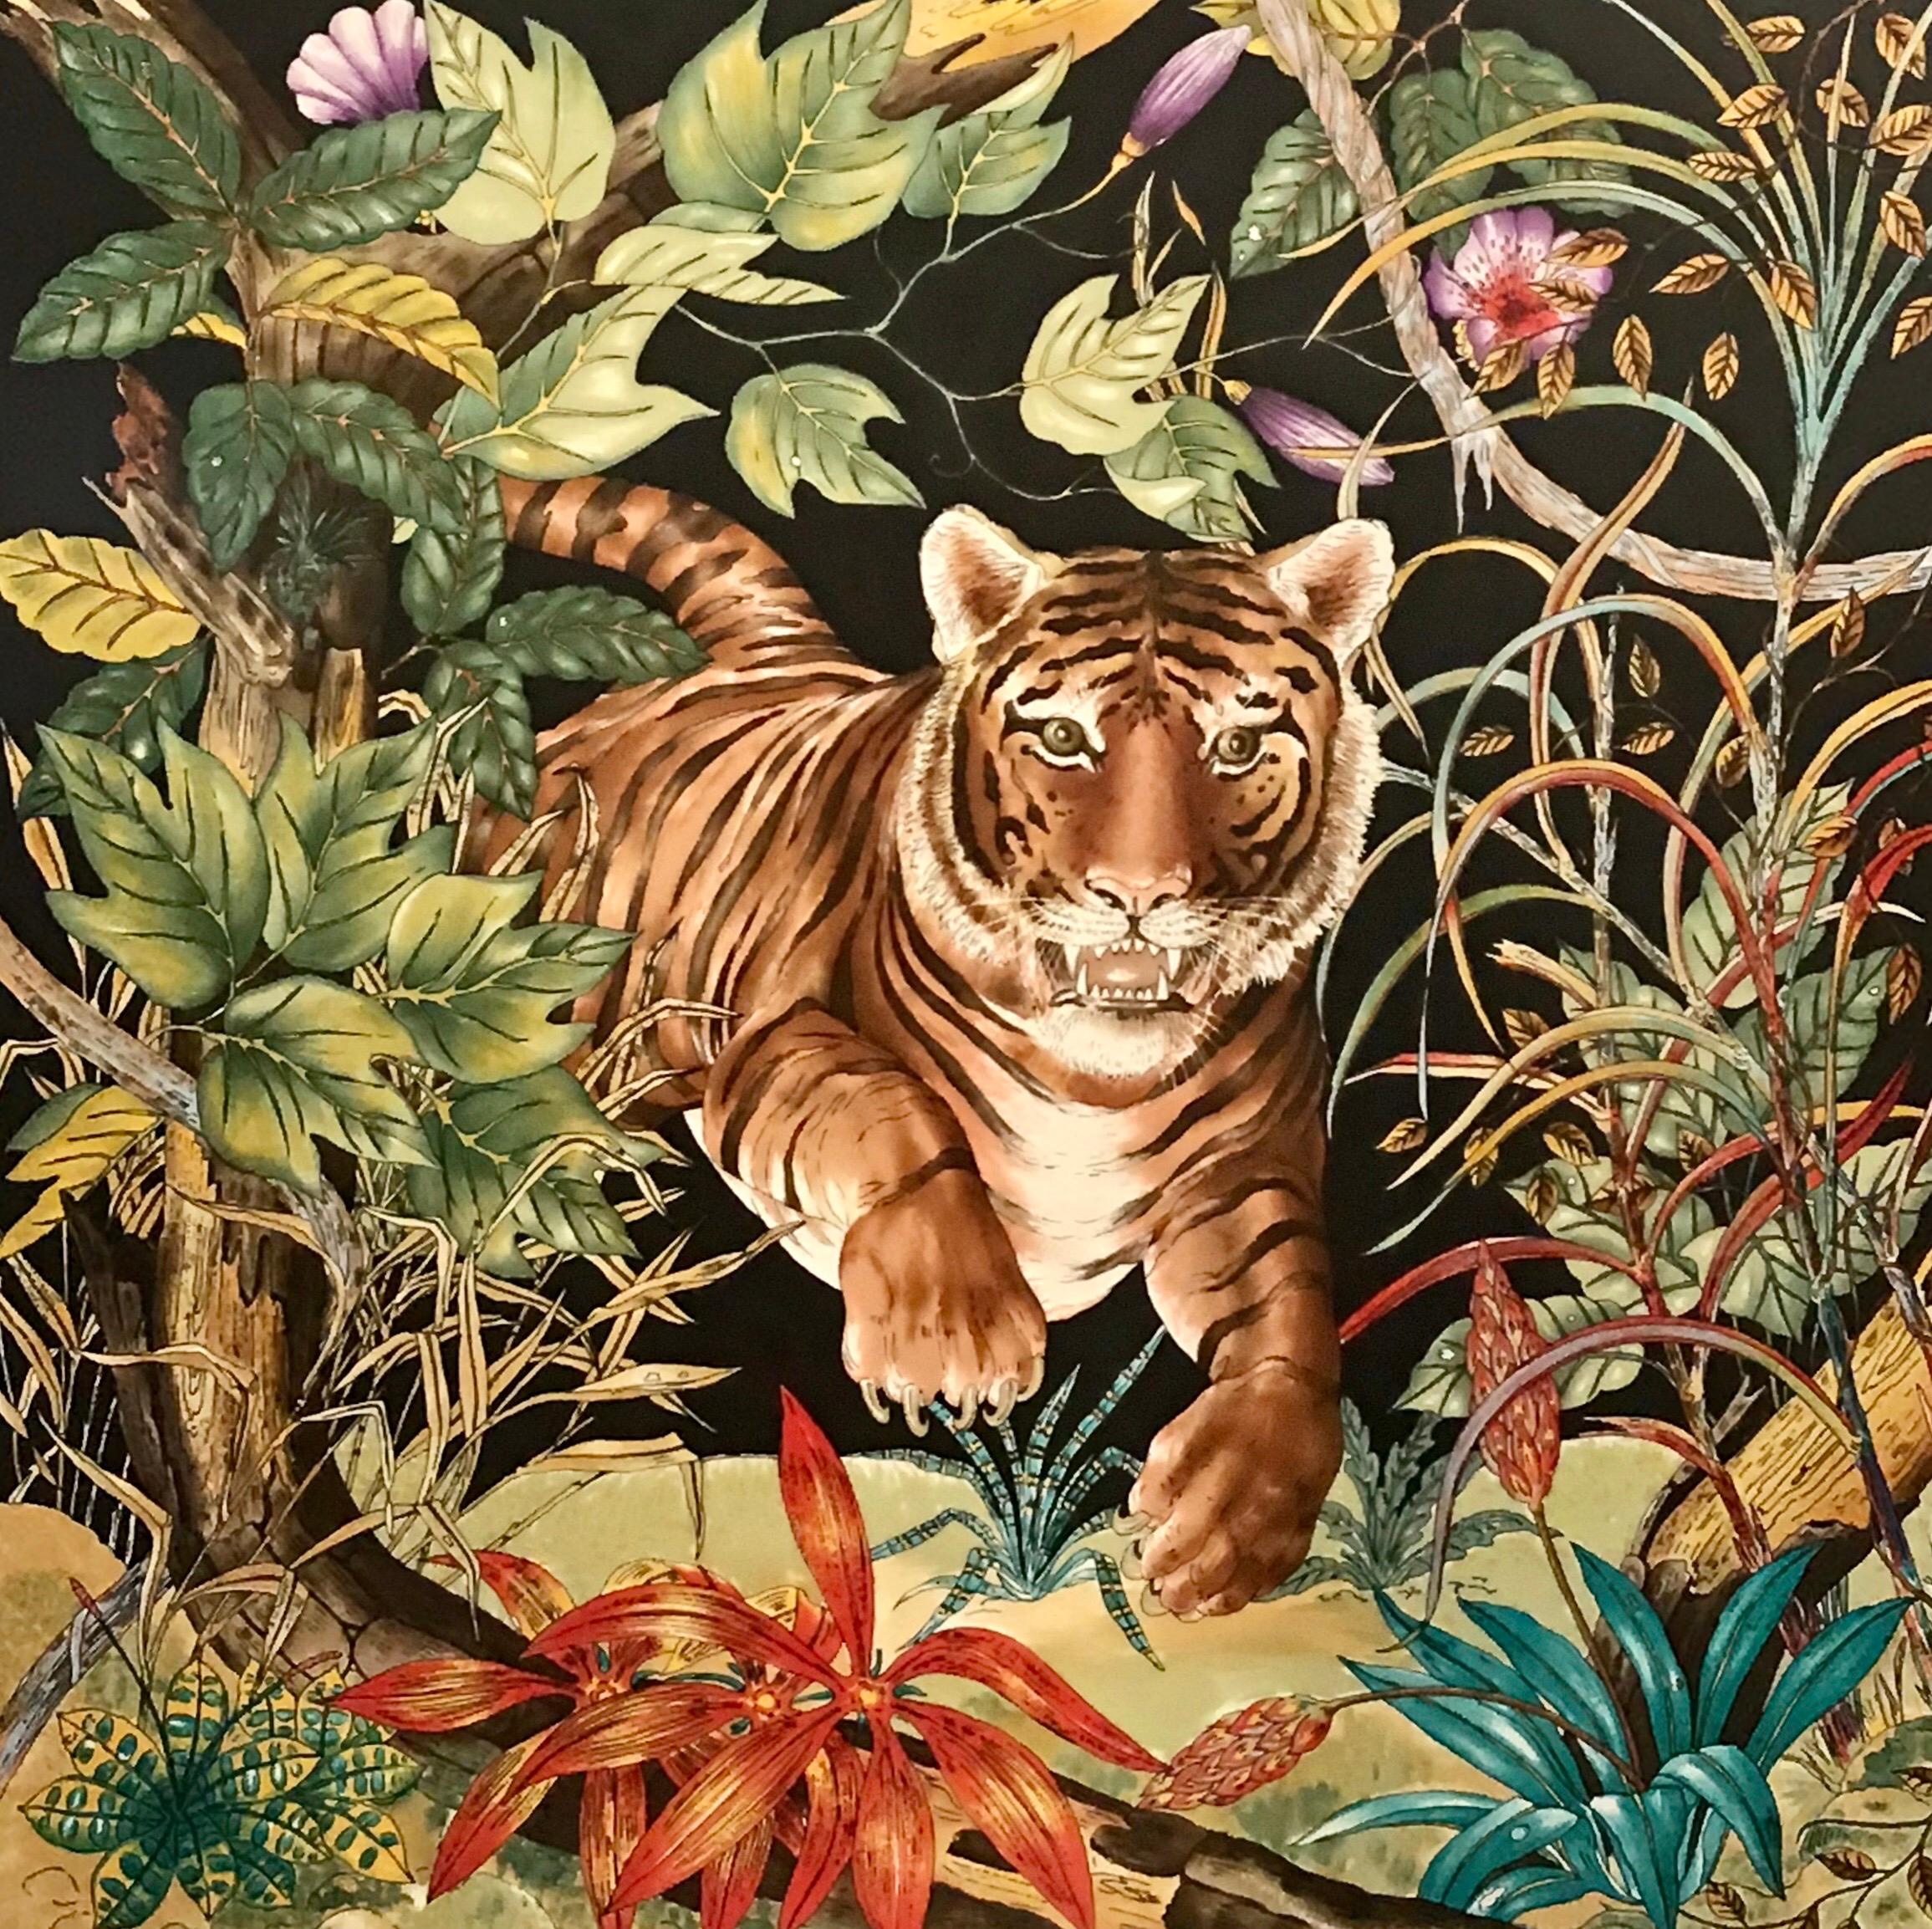 1970s Gucci silk scarf.
A striking tiger in the safari jungle with beautiful floral on a black background. Outlined by iconic Gucci bamboo border. Gucci logo in upper left and lower right corner. Professionally framed in a Classic brass frame with